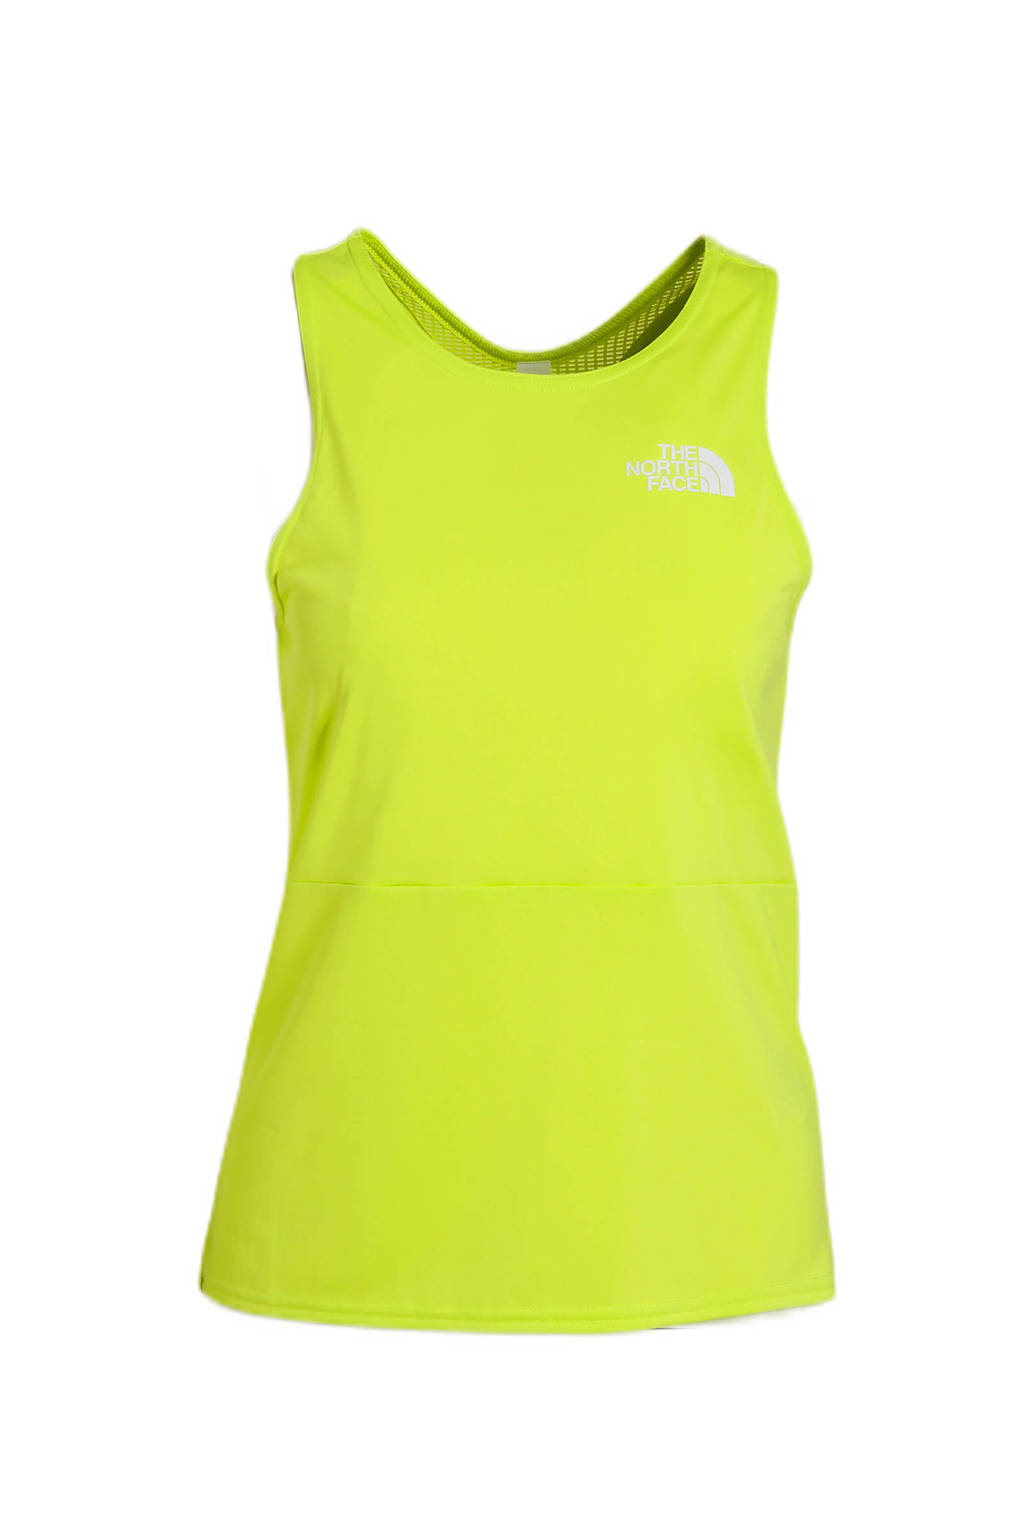 The North Face sporttop limegroen